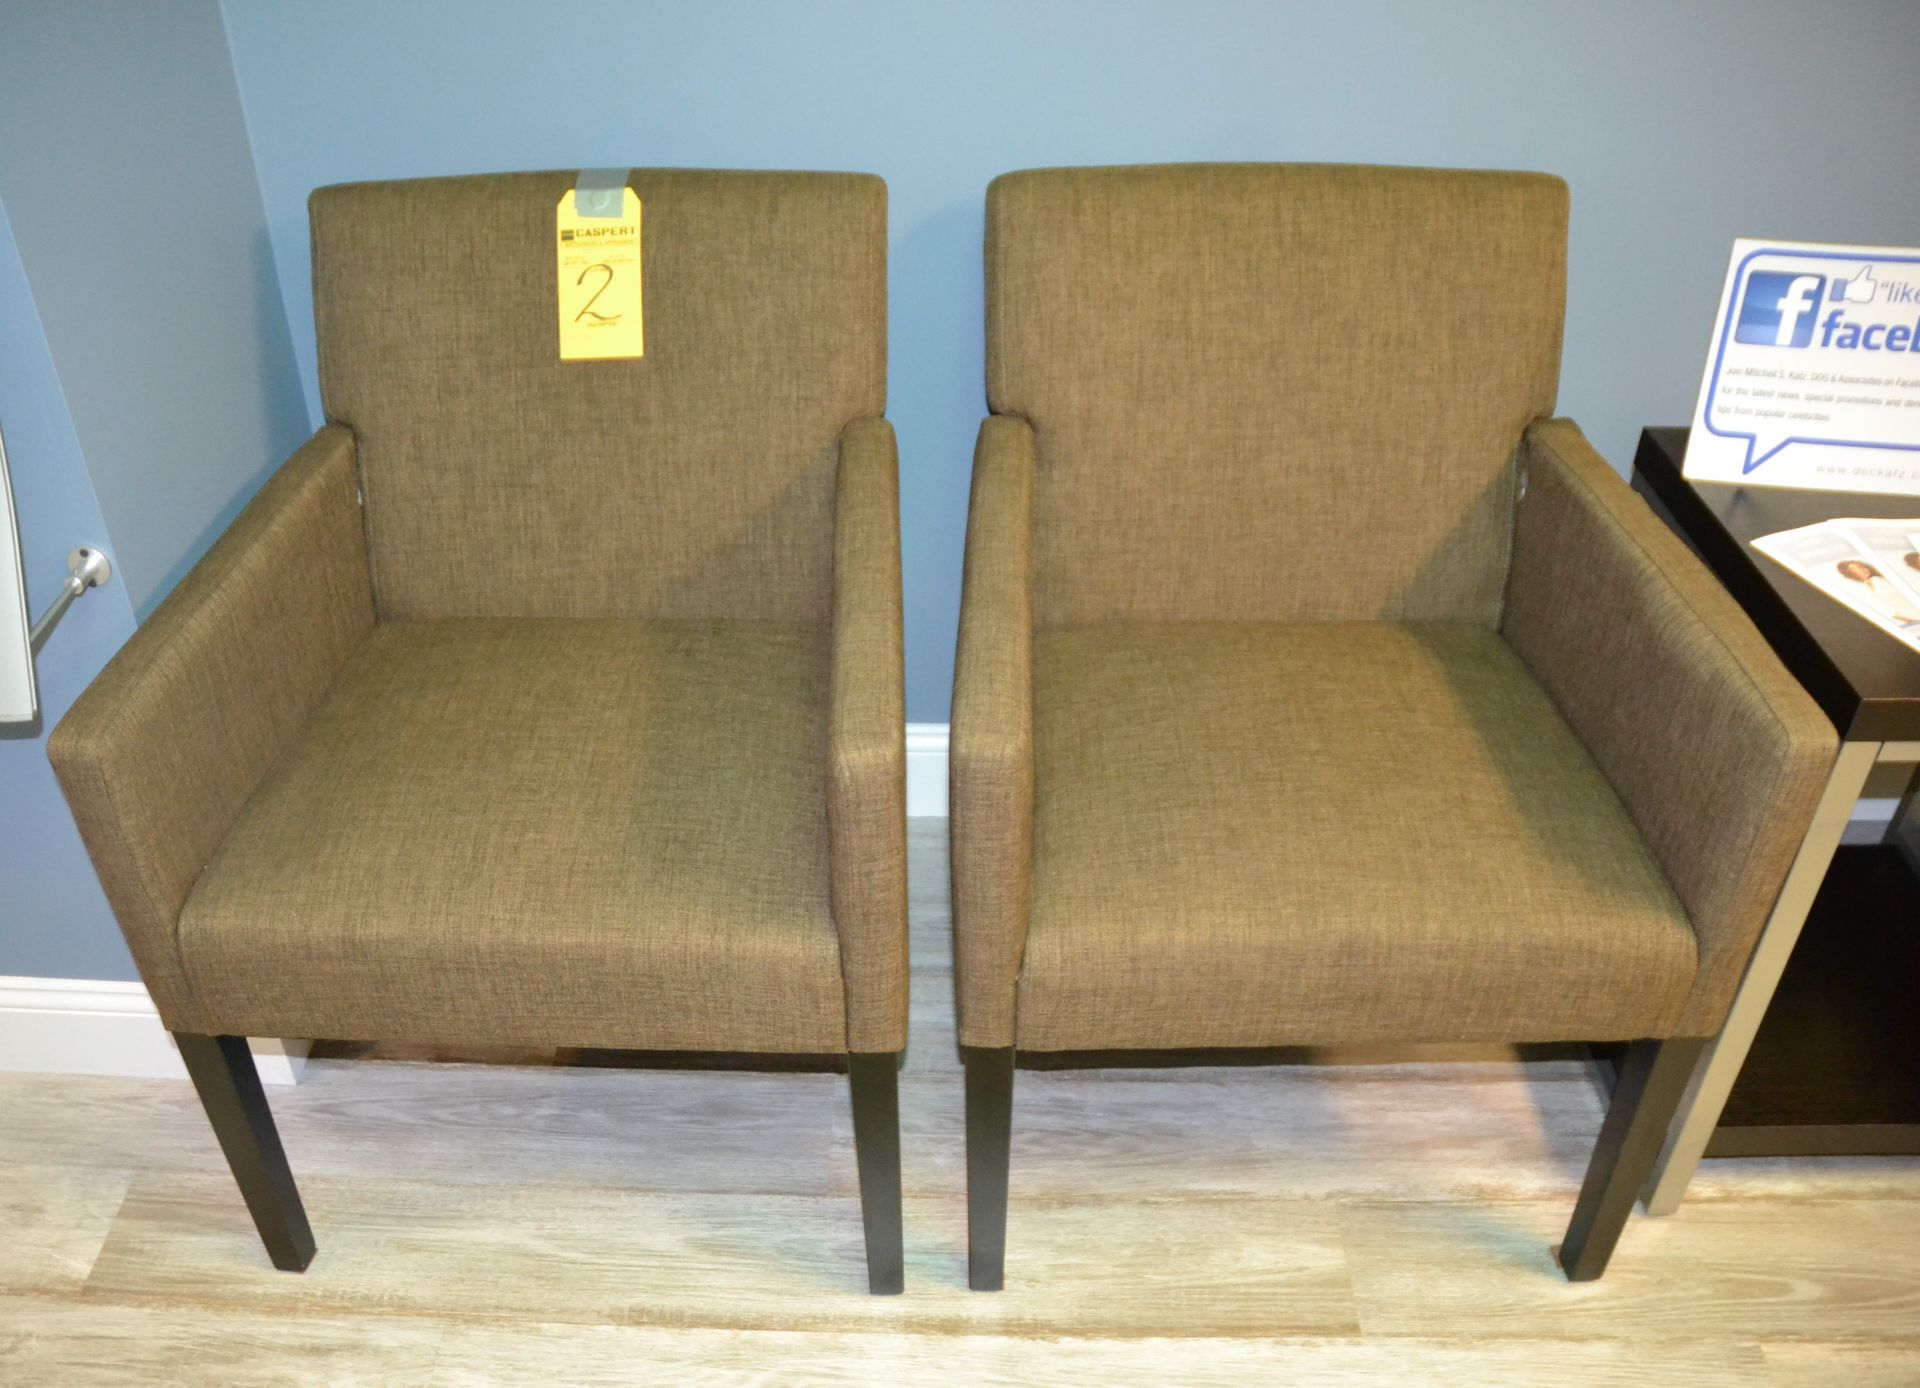 UPHOLSTERED STATIONARY ARM CHAIRS